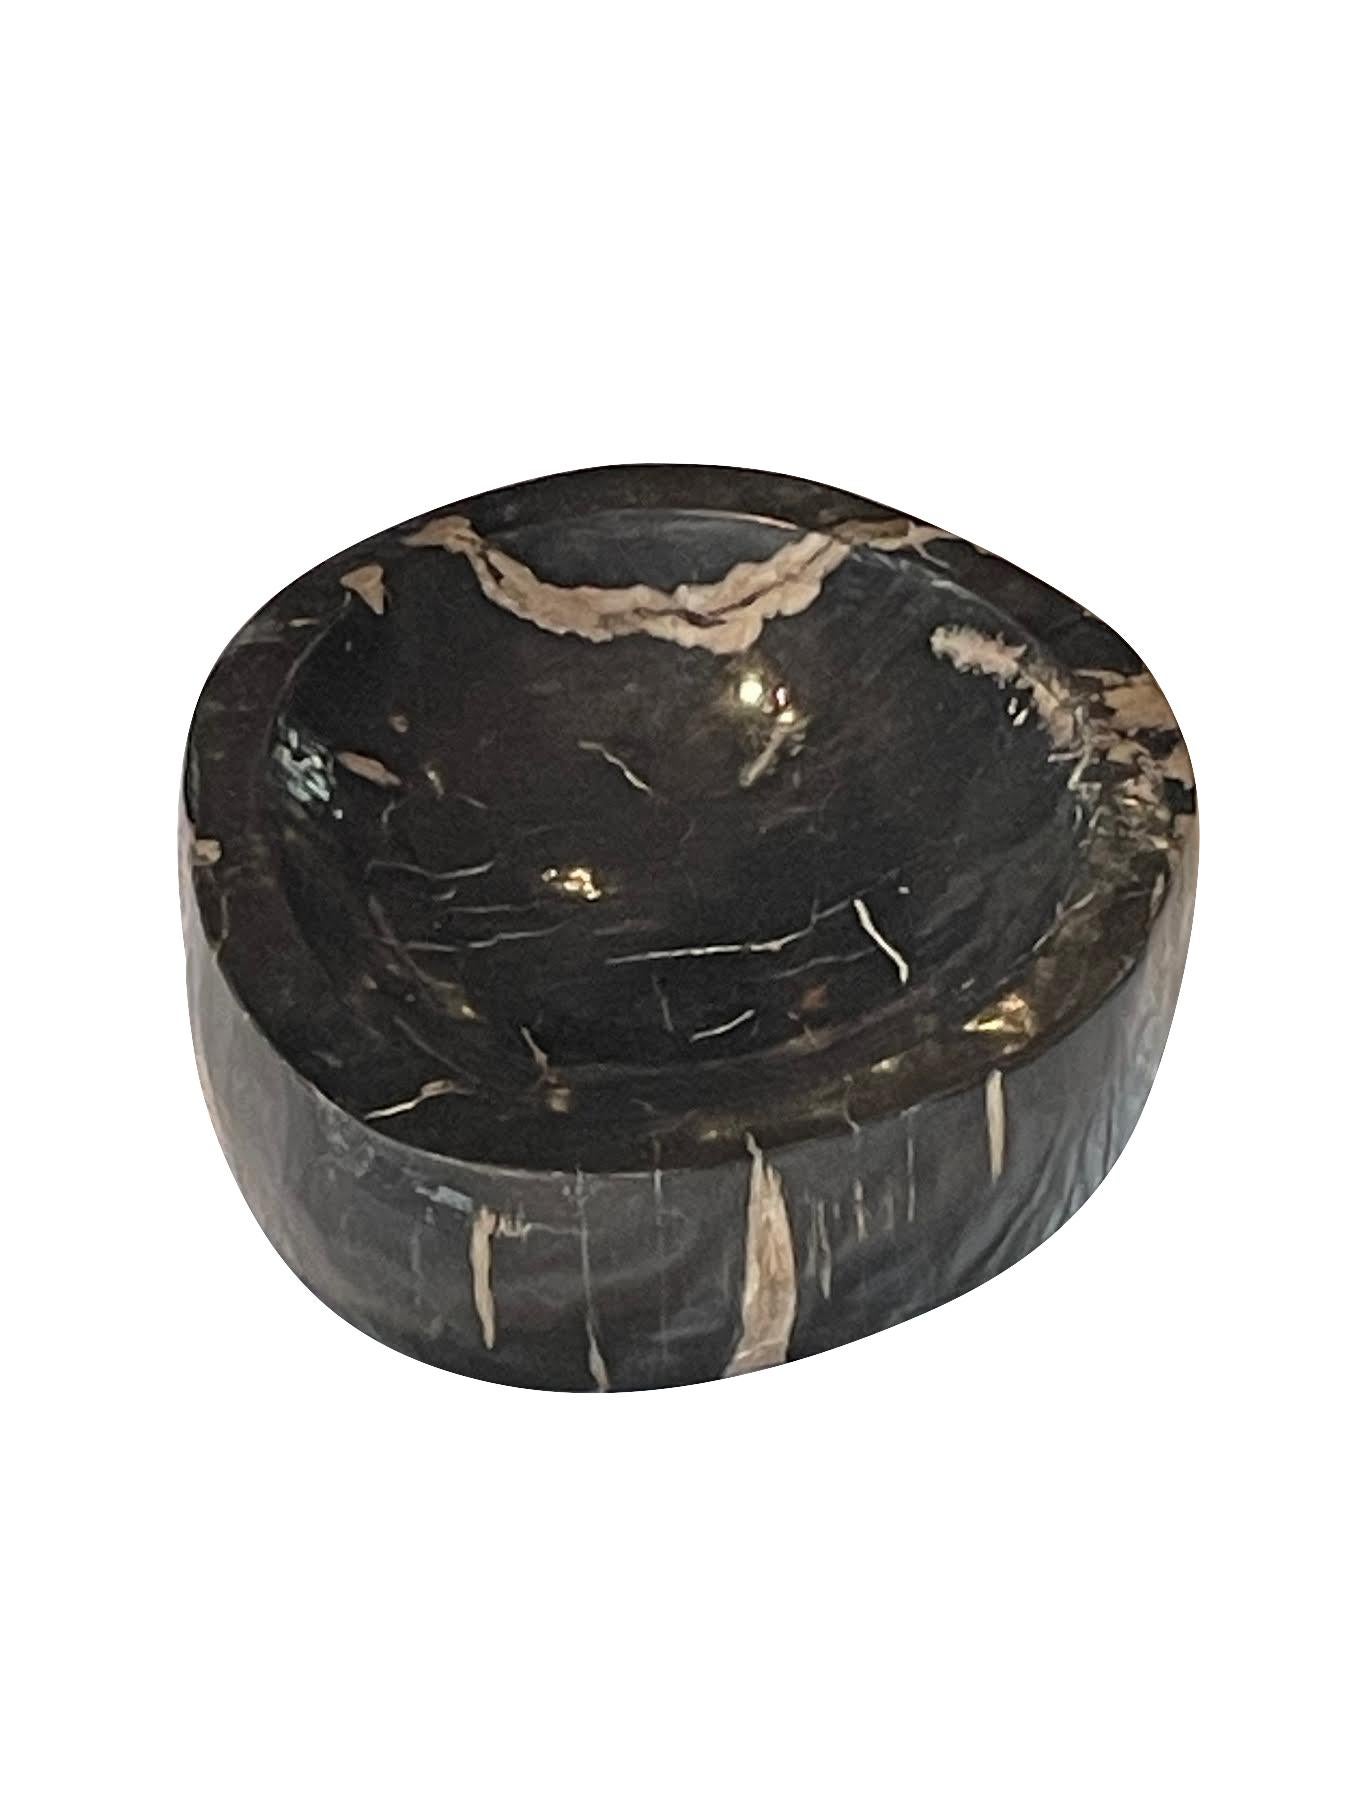 Contemporary Indonesian black petrified wood bowl.
Black with cream accents.
Free form shape.
Smooth polished finish.